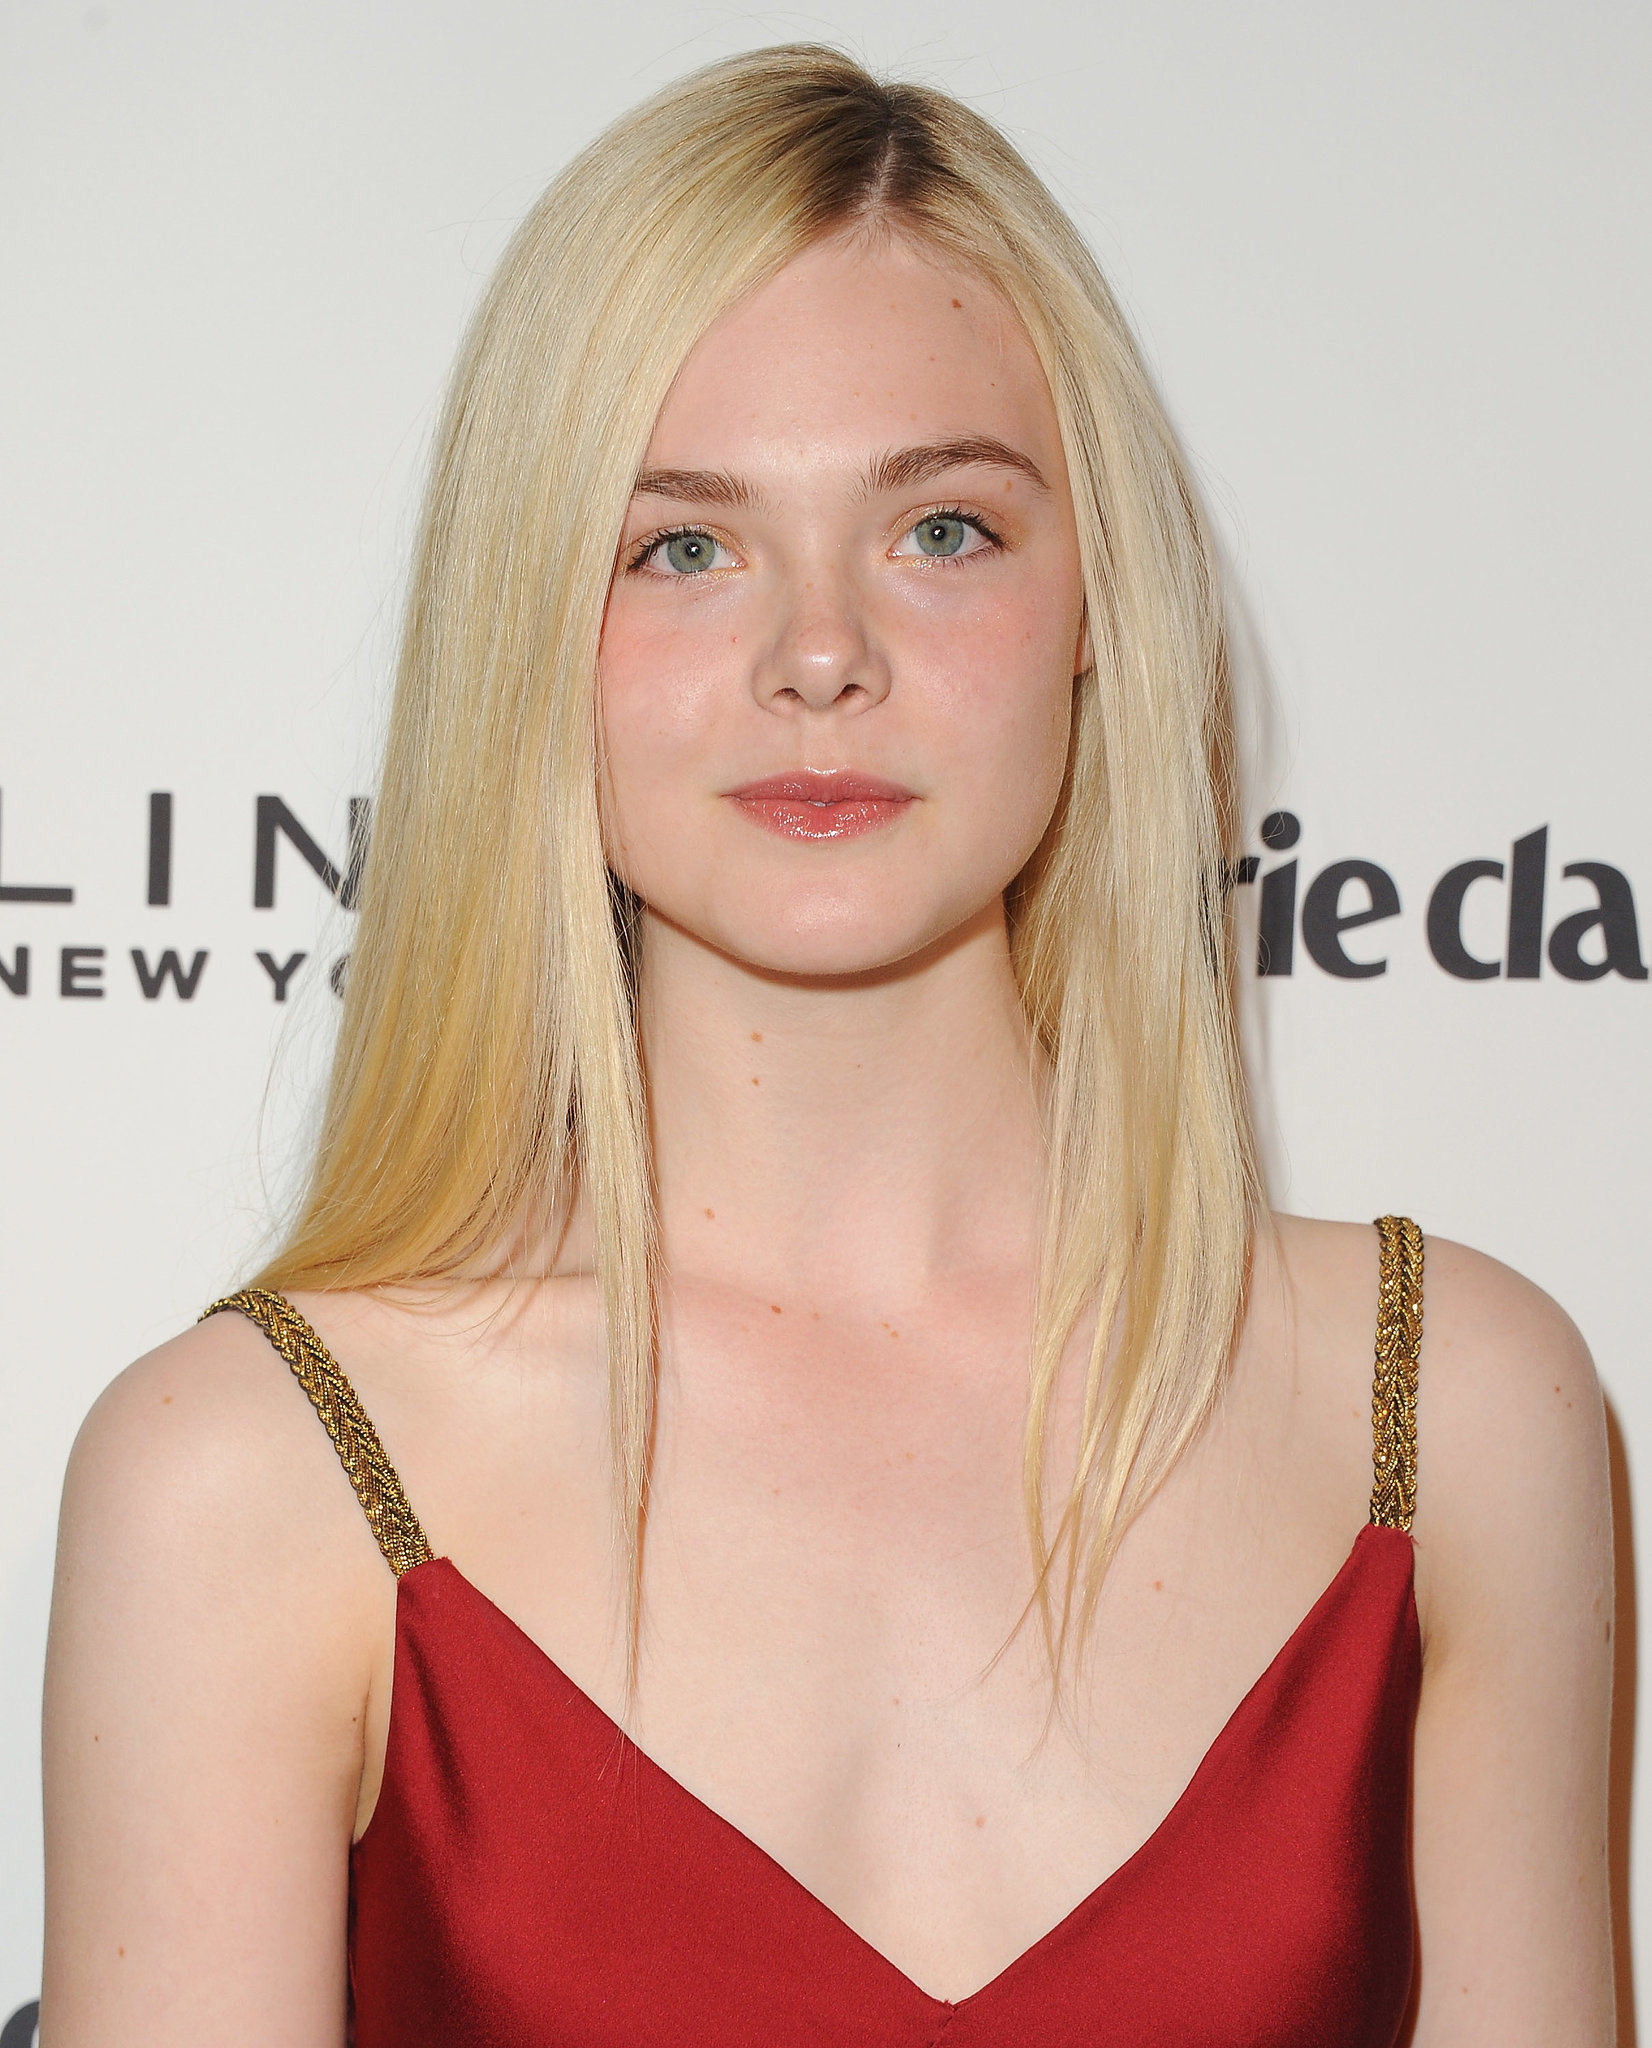 Elle Fanning: Starred in 3 Generations (2015), playing the role of a young transgender man. 1660x2050 HD Wallpaper.